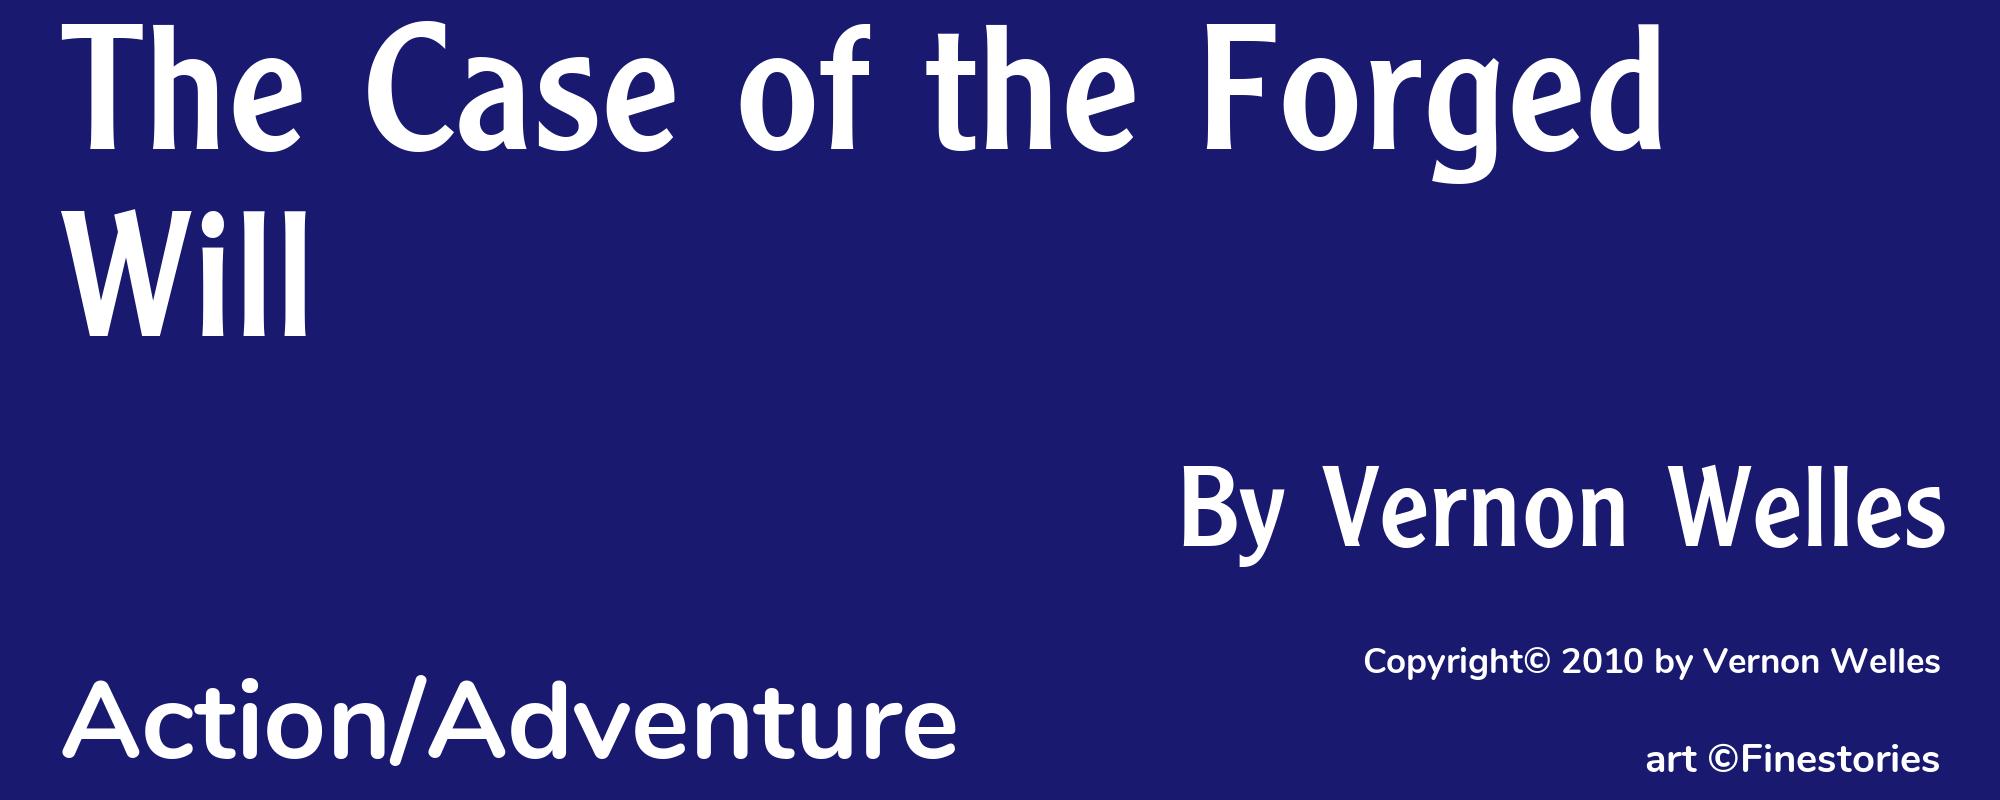 The Case of the Forged Will - Cover